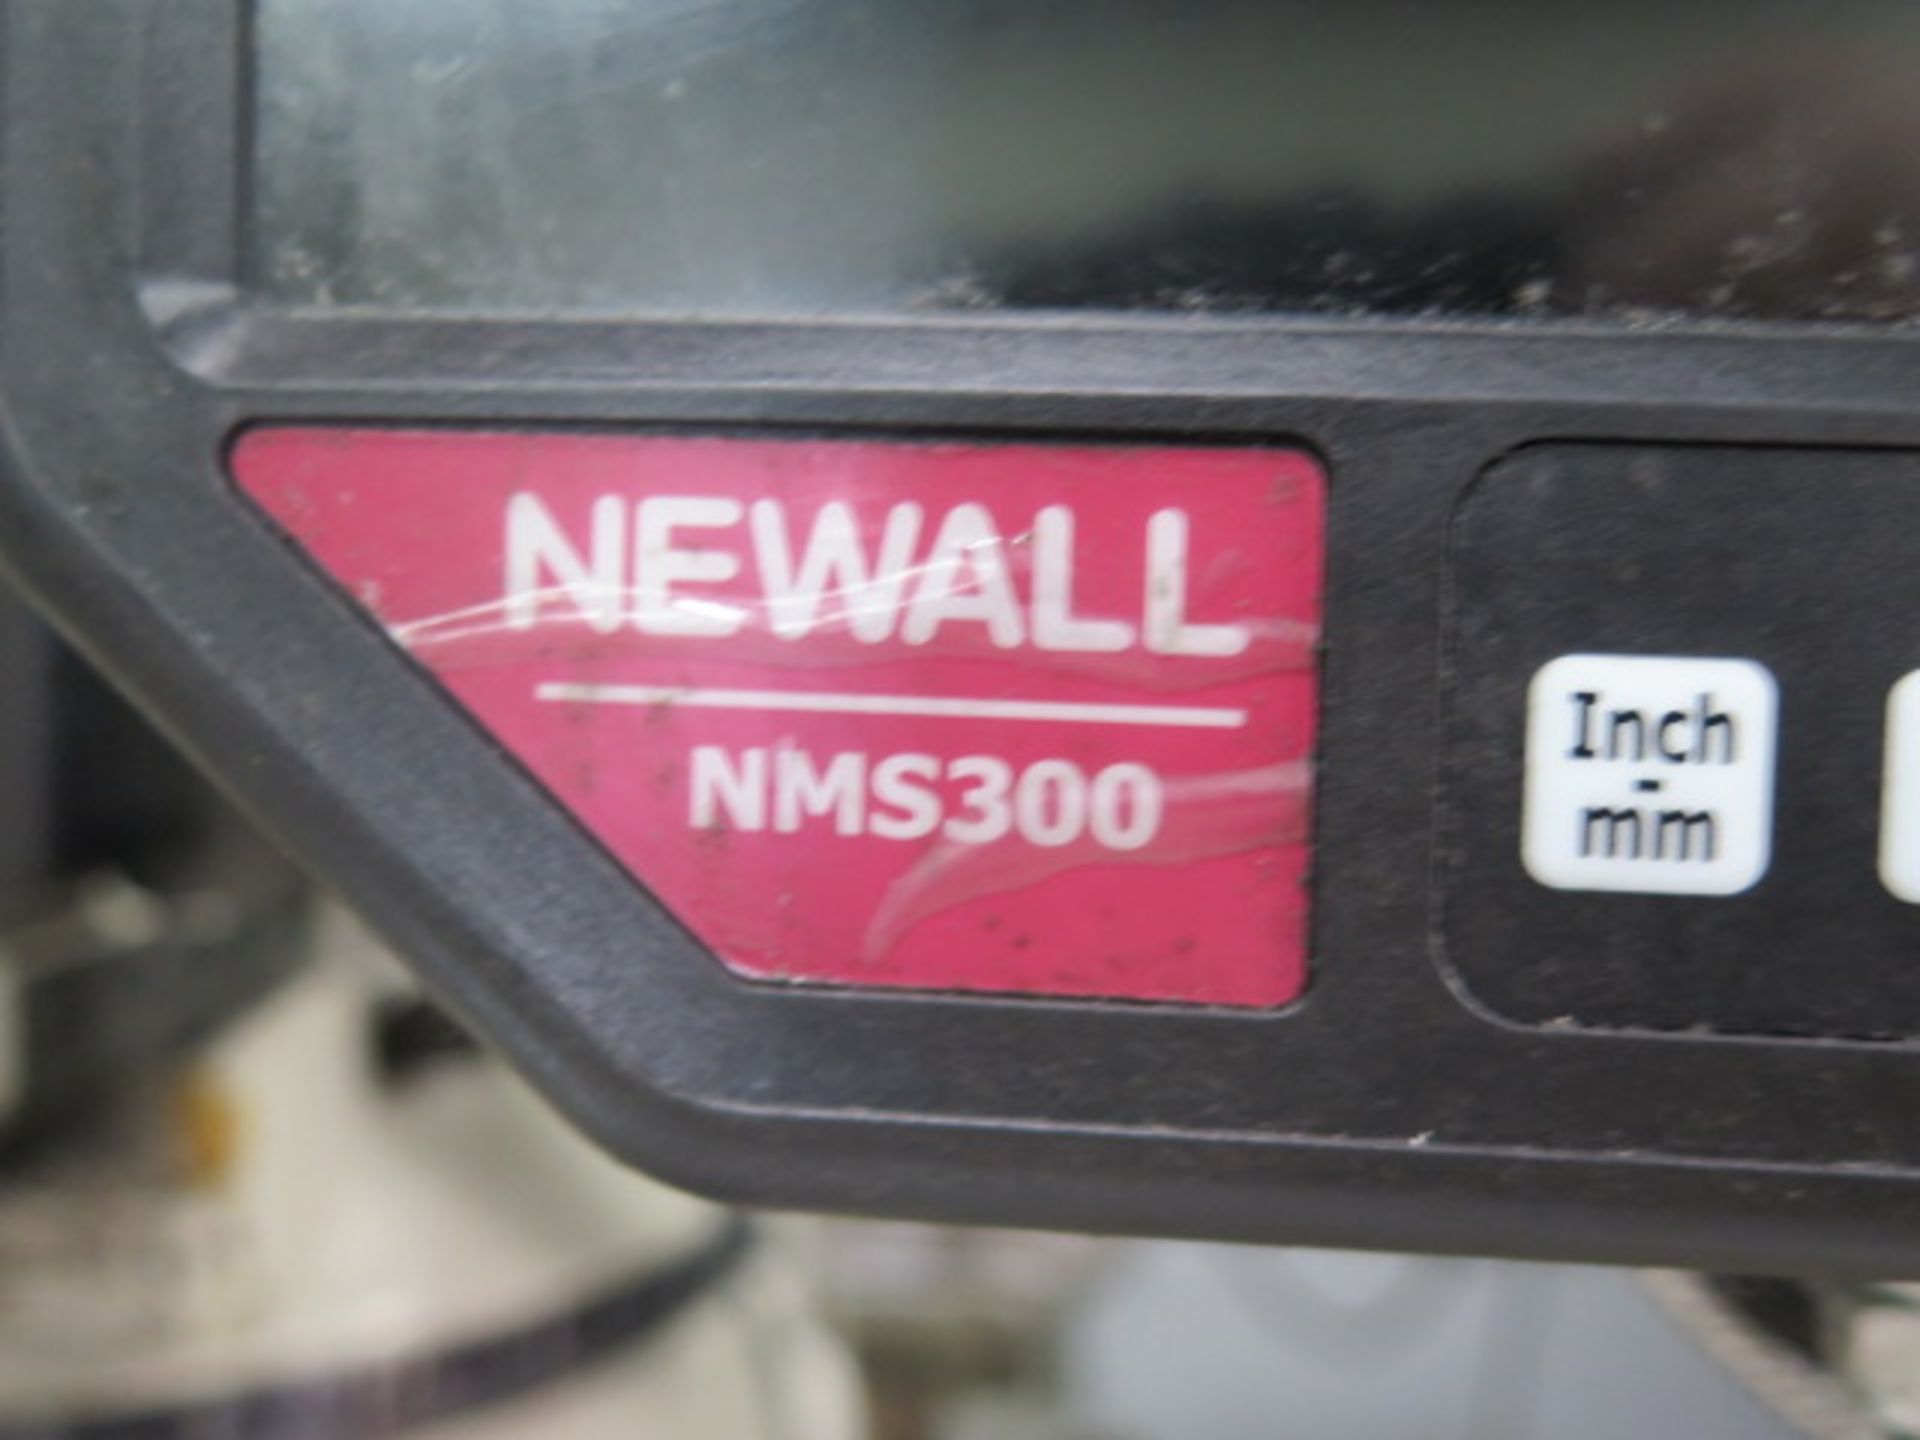 2000 Ganesh GMV-3 Vertical Mill s/n 11527 w/ Newall NMS300 3-Axis Programmable DRO, 3Hp, SOLD AS IS - Image 6 of 14